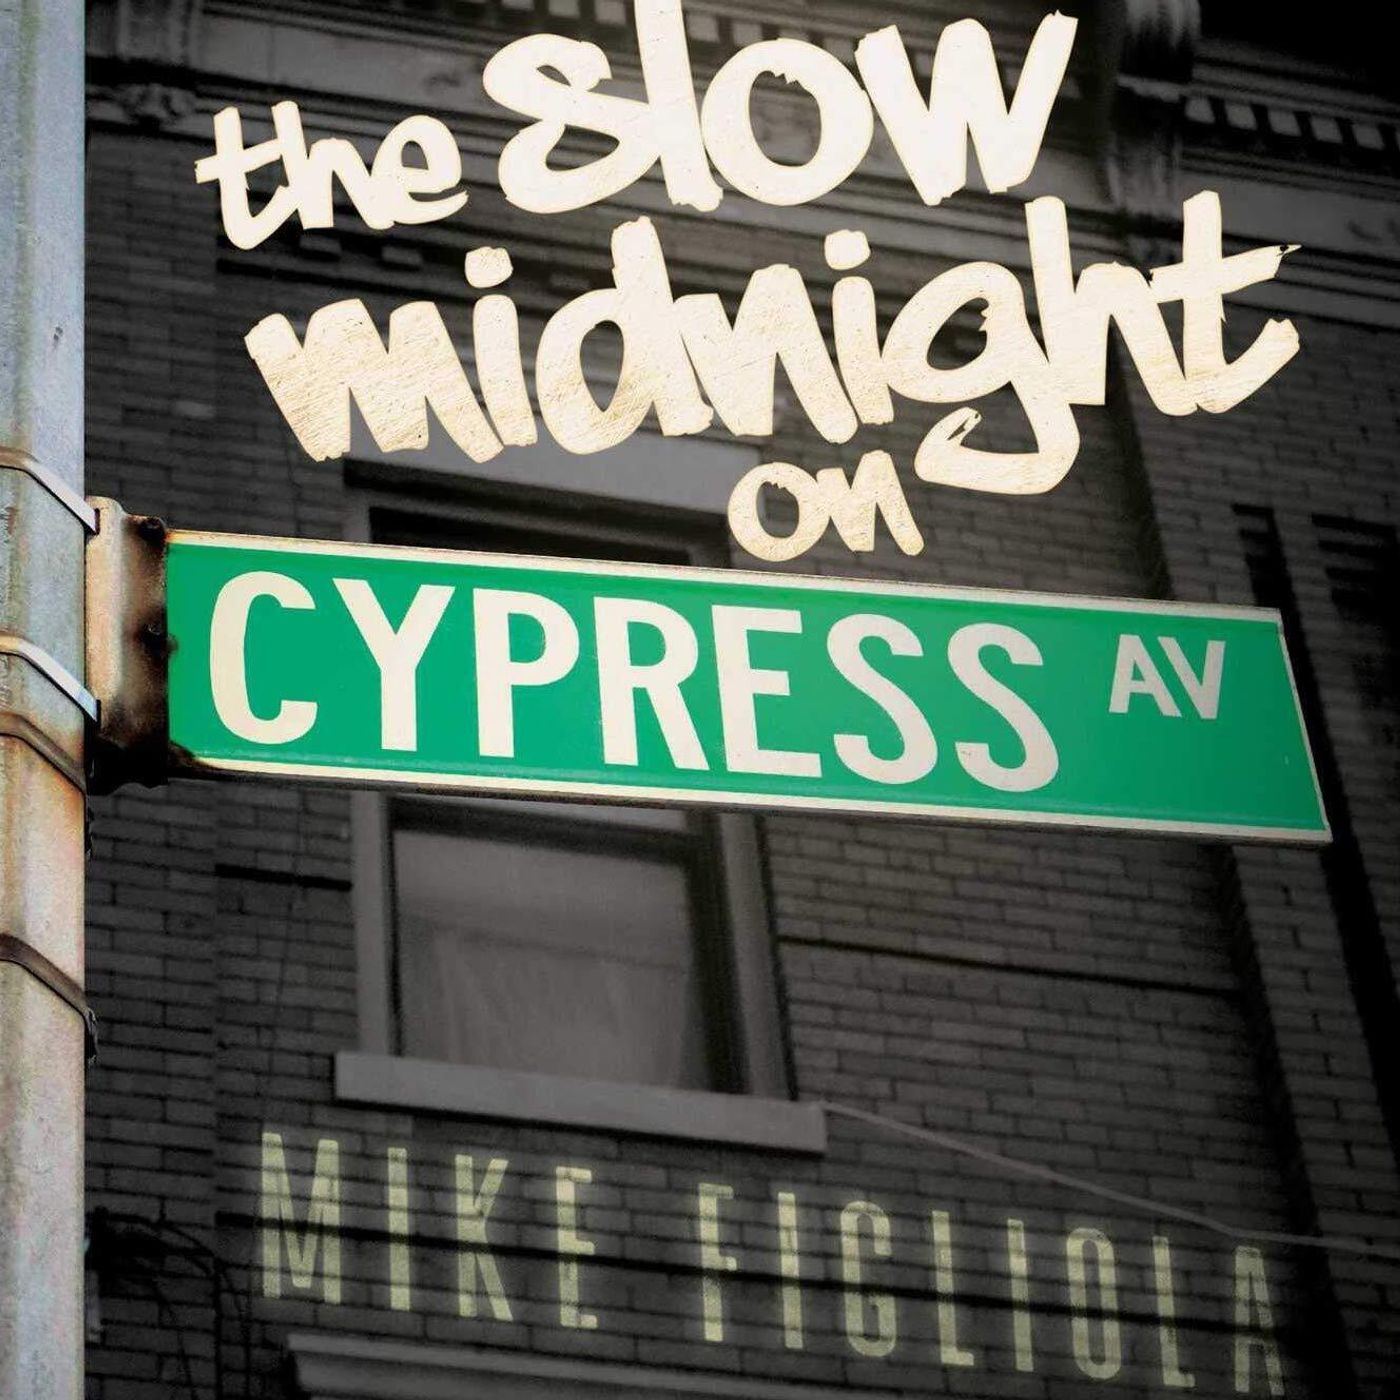 Mike Figliola -  Author, ”The Slow Midnight on Cypress Ave”